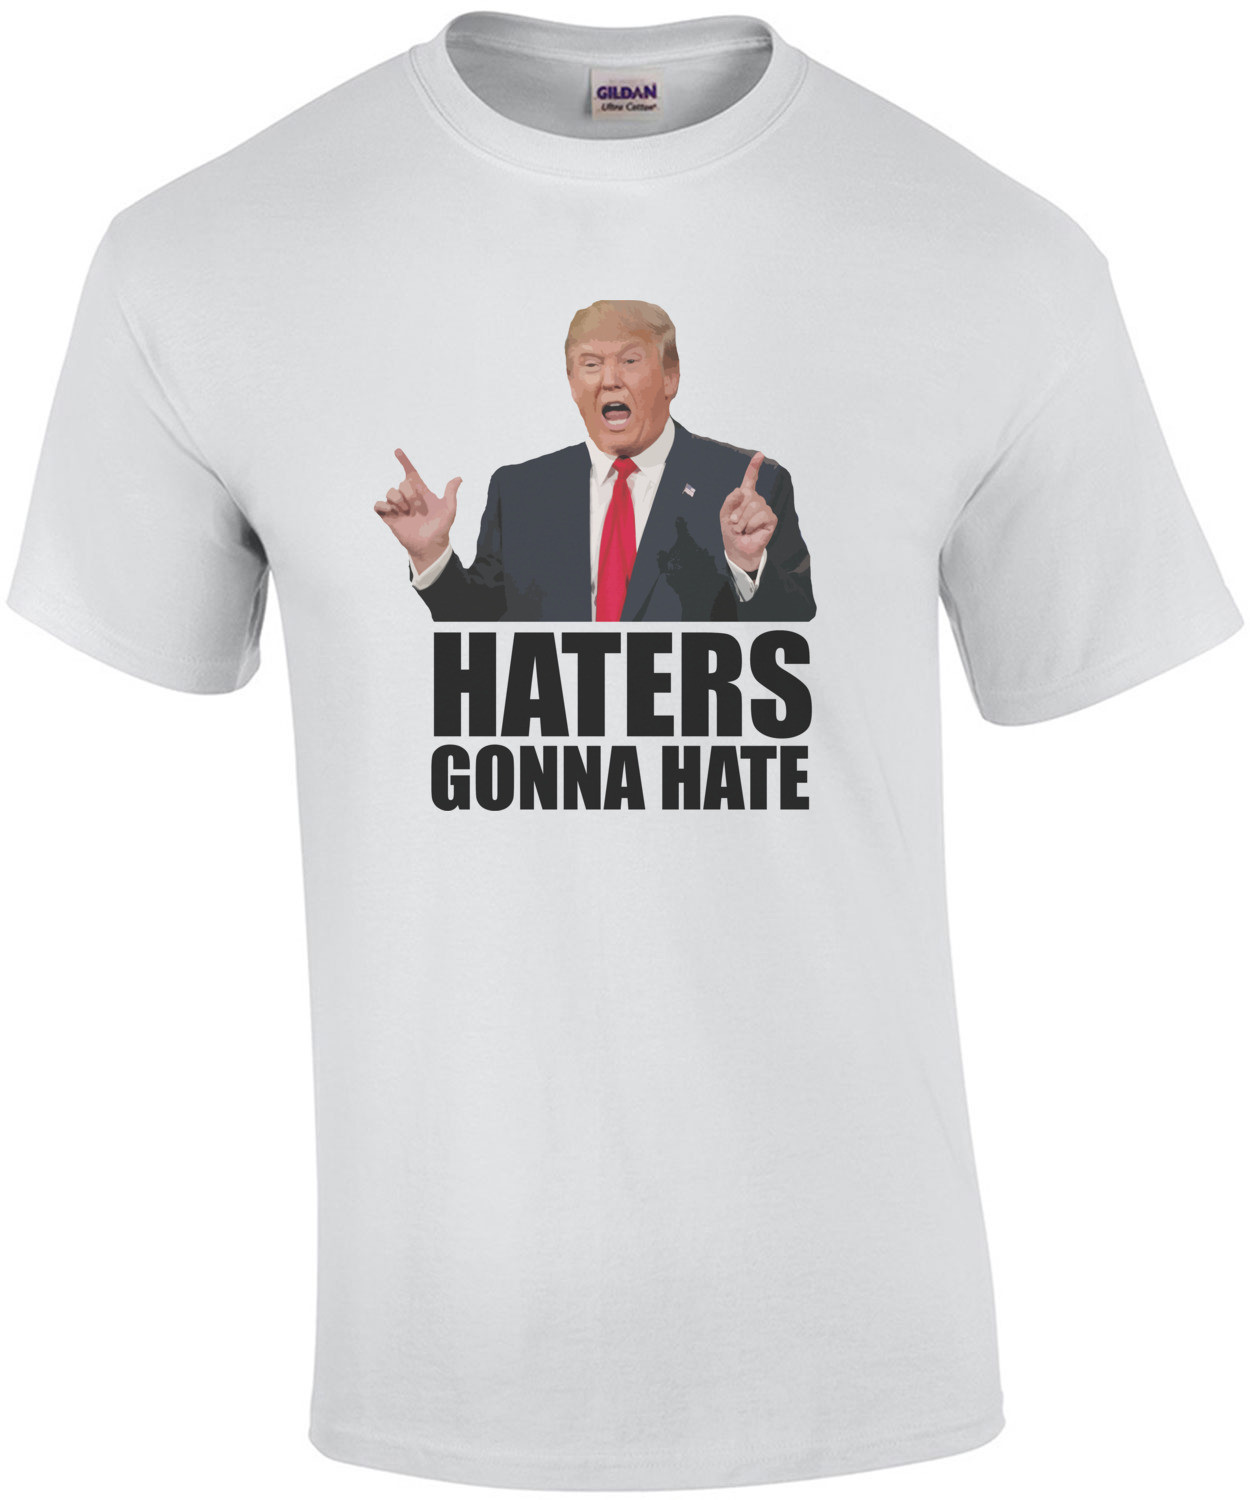 Haters gonna hate - Donald Trump Blue T-Shirt